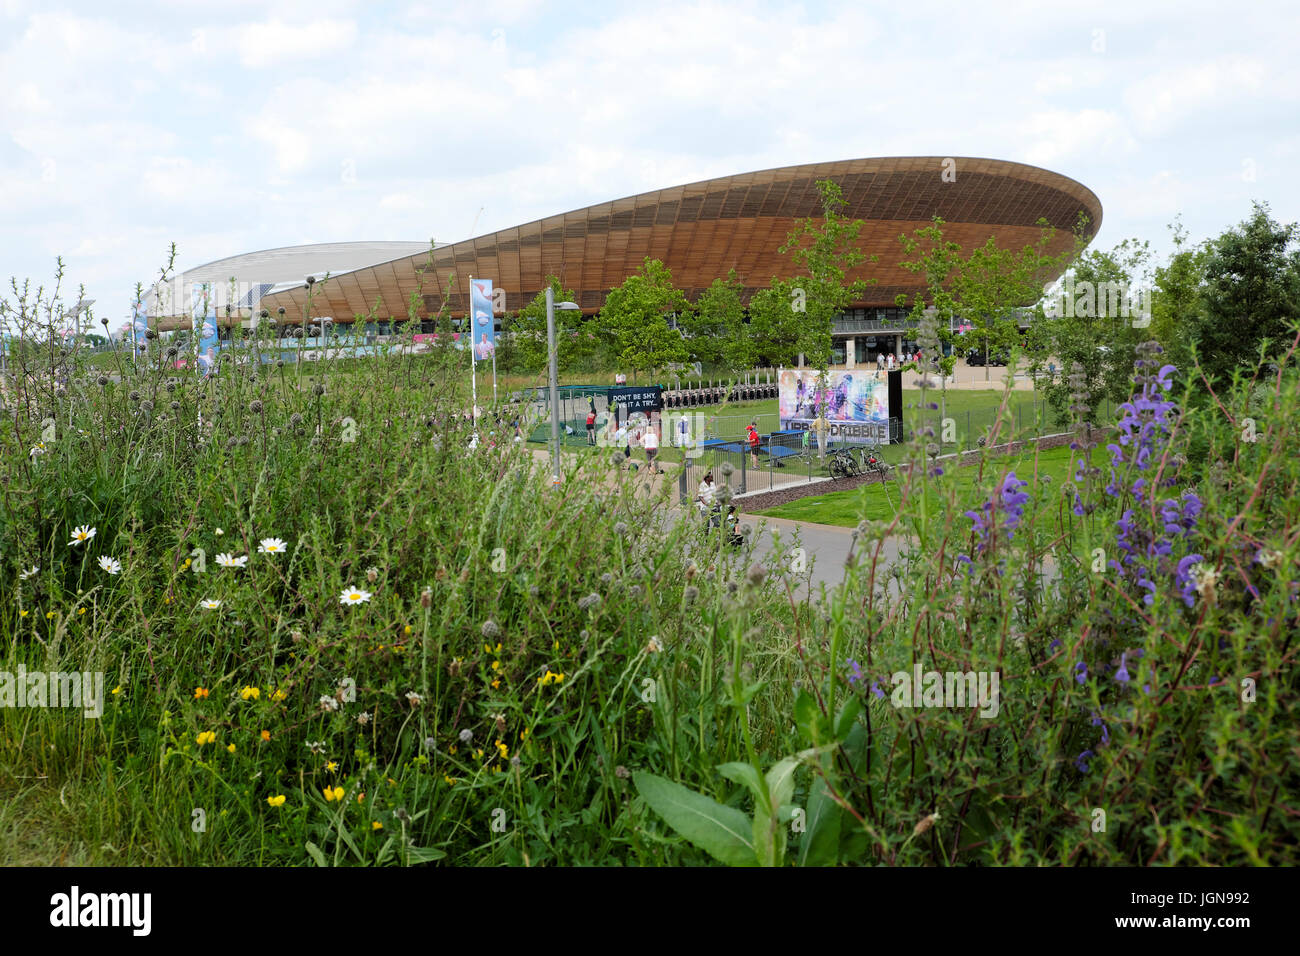 Wildflowers bloom in June near the Queen Elizabeth Olympic Park Velodrome people cycling venue Stratford, Newham East London England UK   KATHY DEWITT Stock Photo